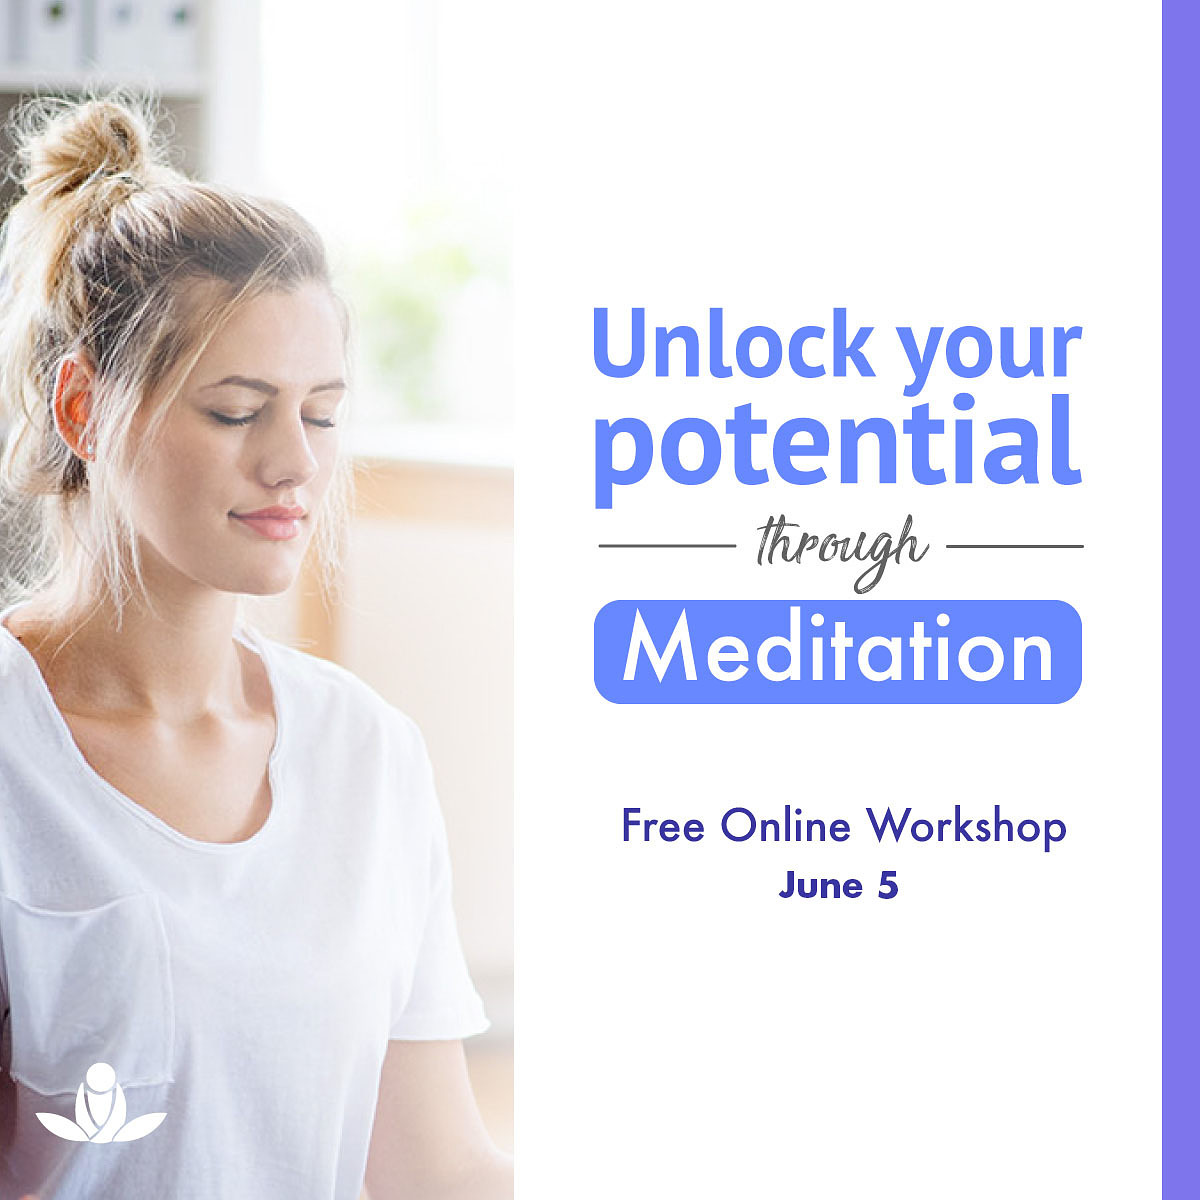 Inner restlessness?
The #innerpeace we are searching for is already within. Join this series of free #meditation webinars:
sos.org/webinars/spiri…

Discover your true essence as spirit!

#LearnToMeditate
#SOSMeditation
#Peace #Love
#Soul #Spirituality
#ScienceOfSpirituality